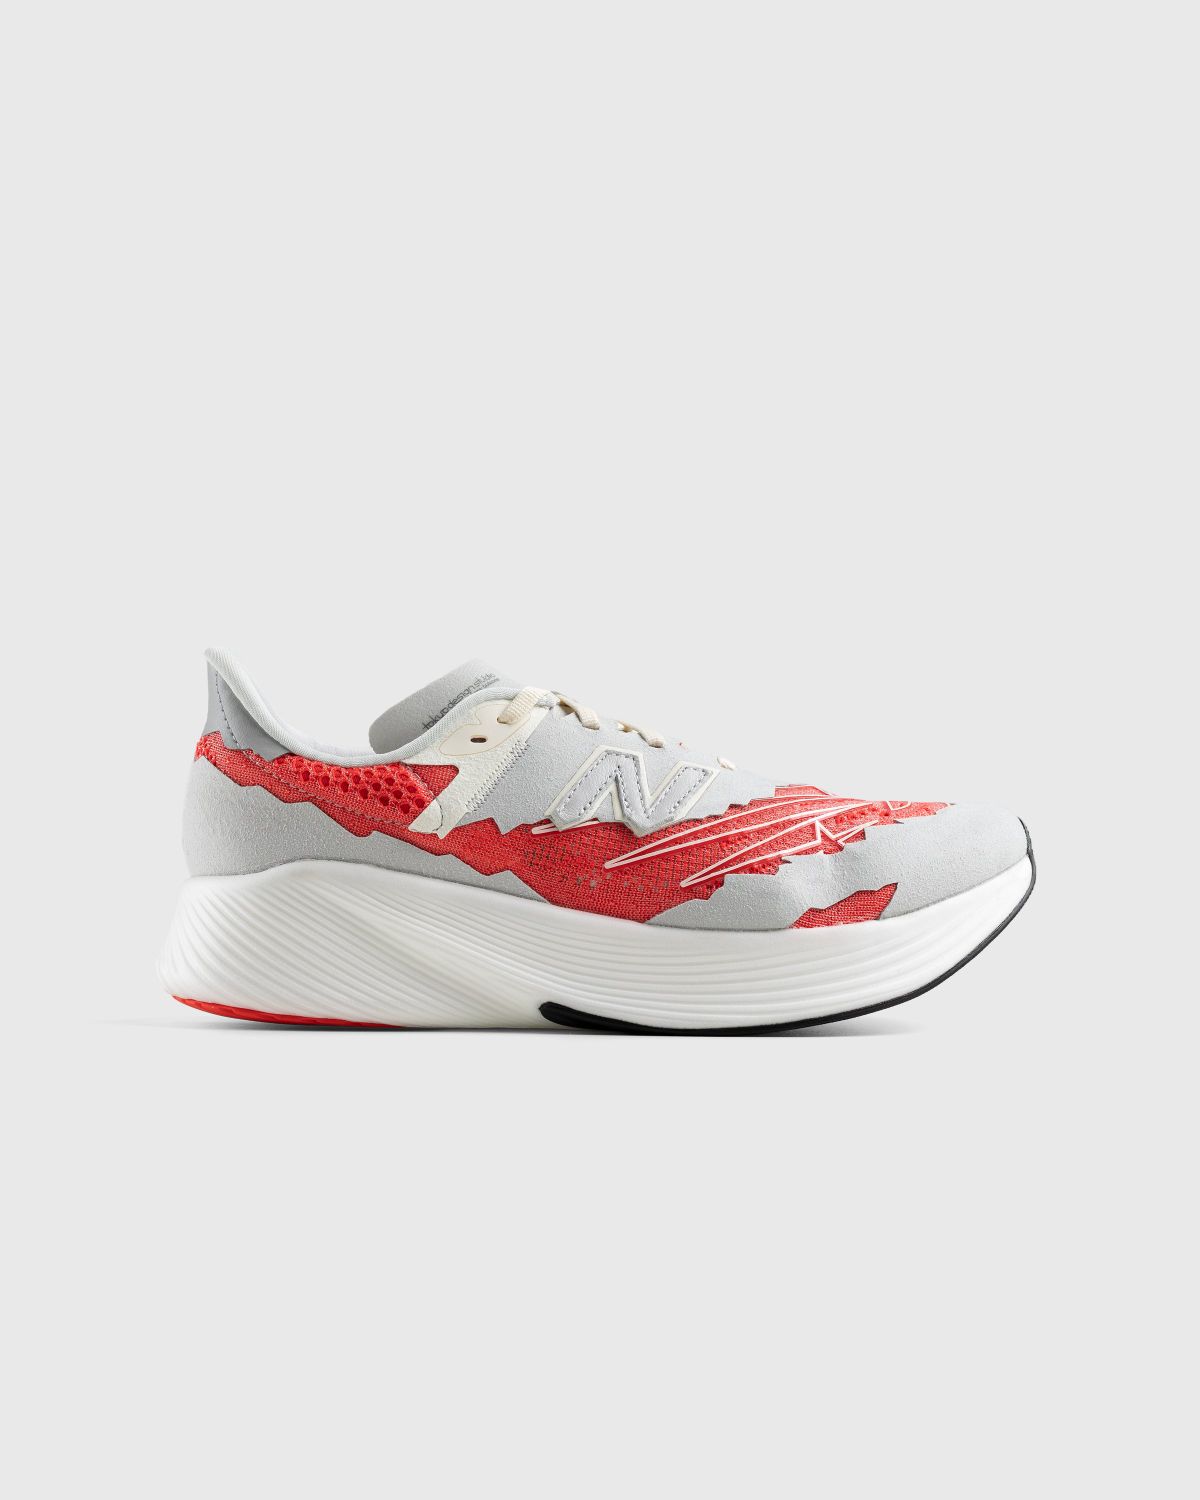 New Balance x Stone Island – FuelCell RC Elite v2 Neo Flame - Sneakers - Red - Image 1